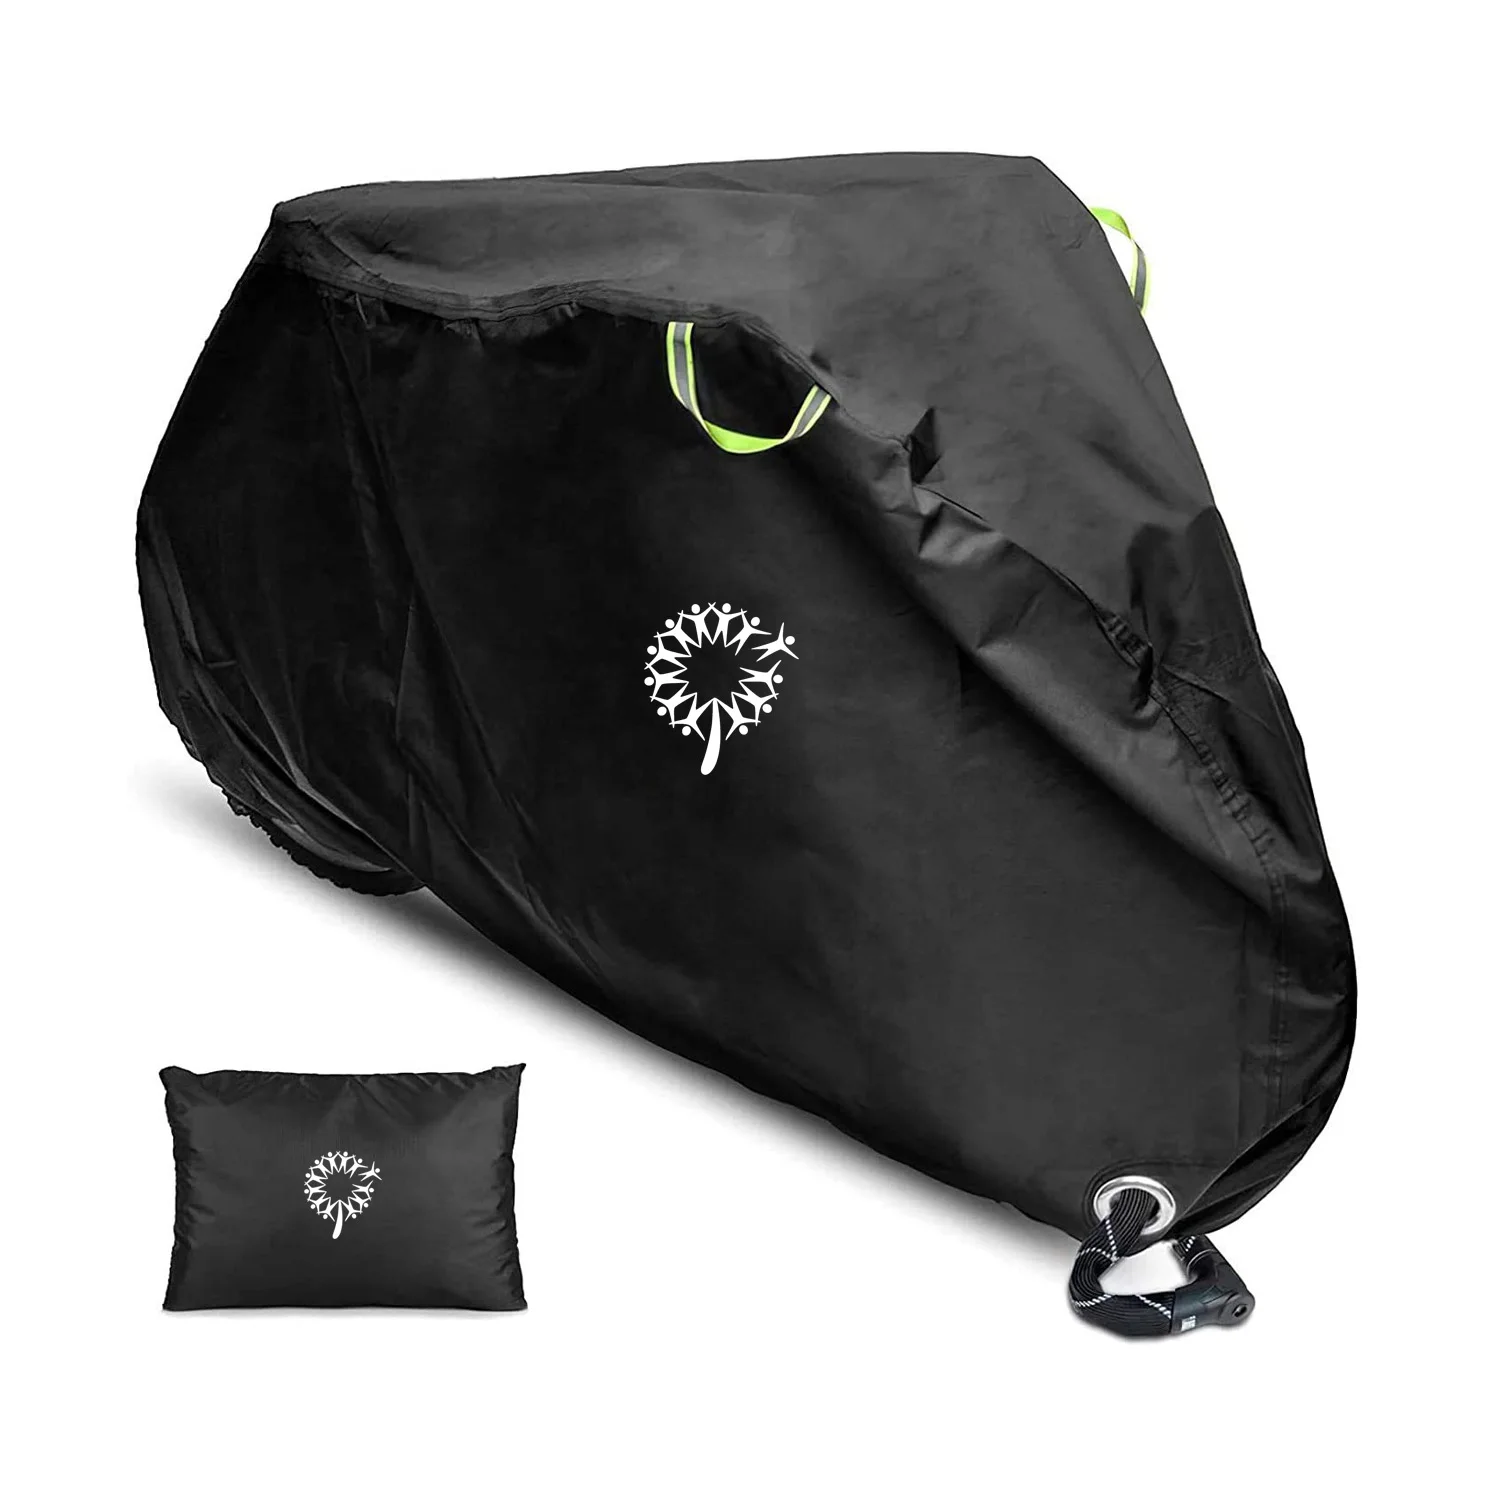 210T Polyester Windproof Water Resistant Bike Cover with Elastic Hem for Mountain Road Electric Bike